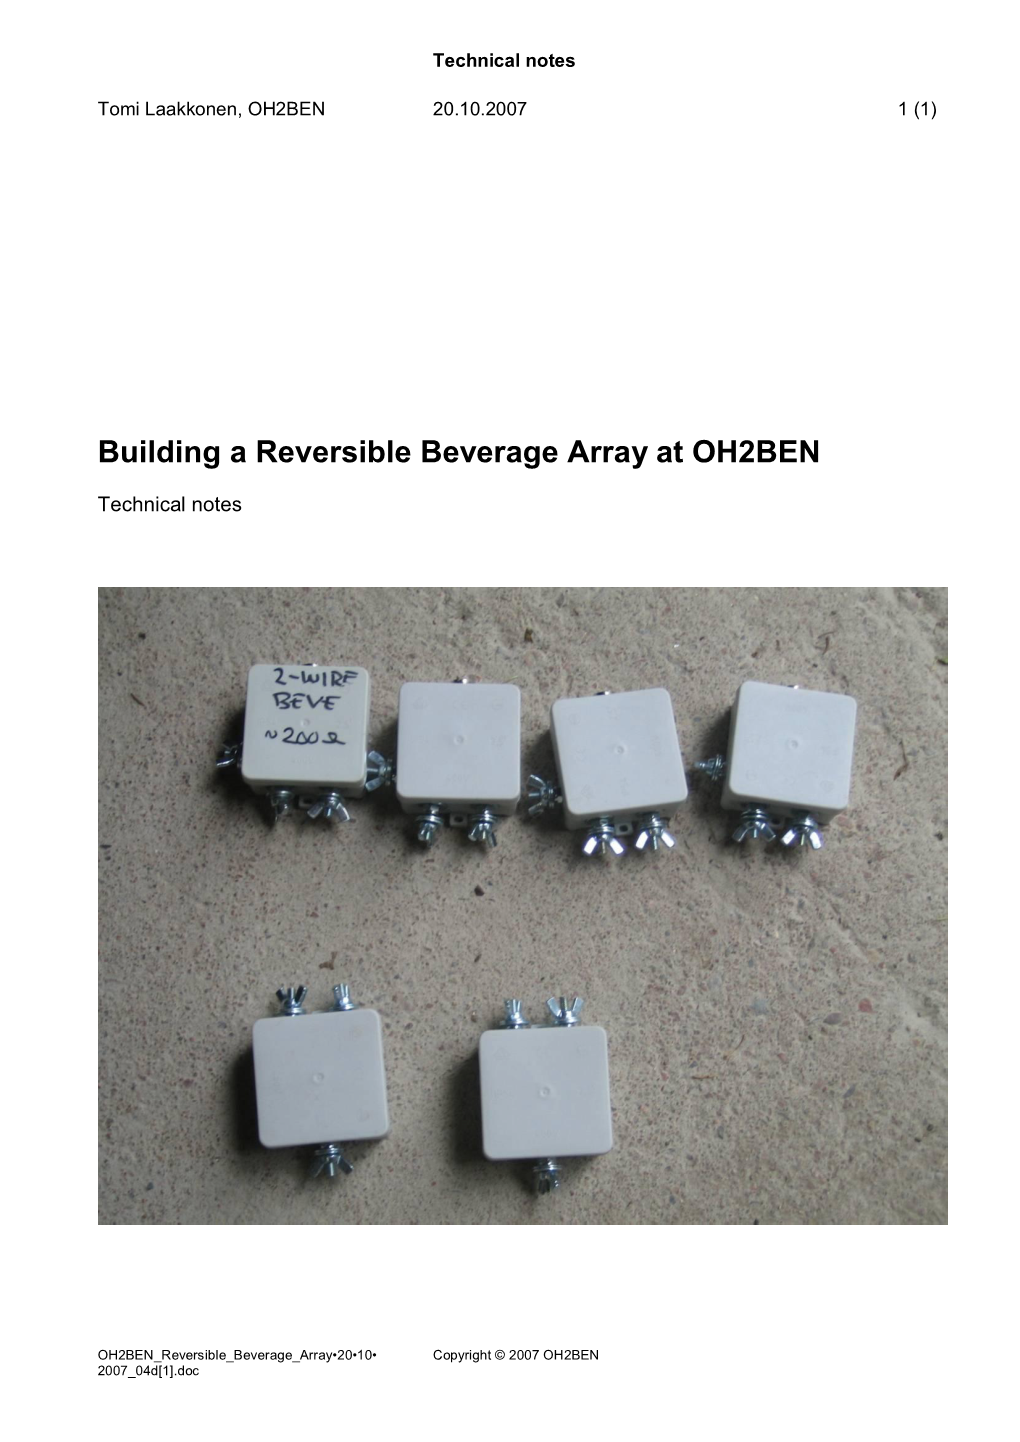 Building a Reversible Beverage Array at OH2BEN